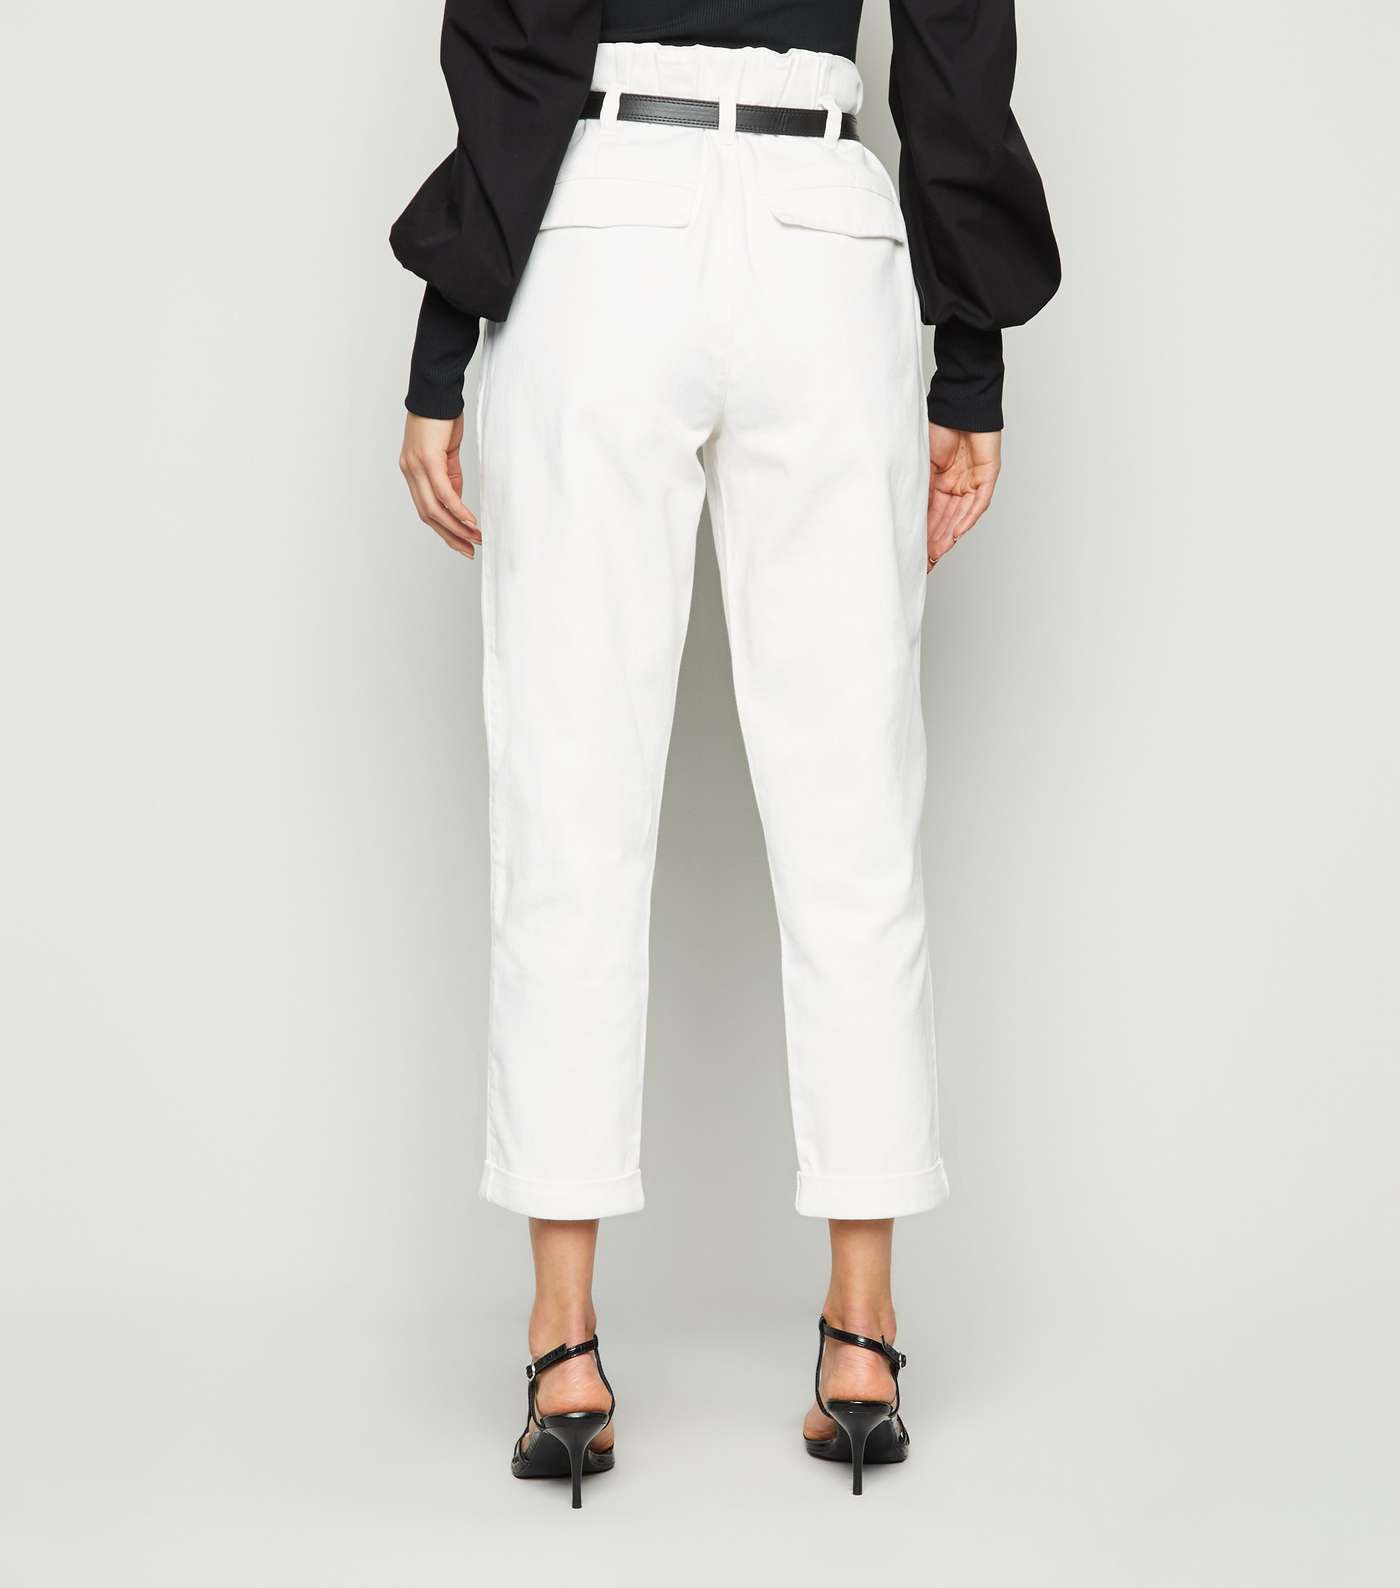 Off White High Waist Belted Jeans Image 3